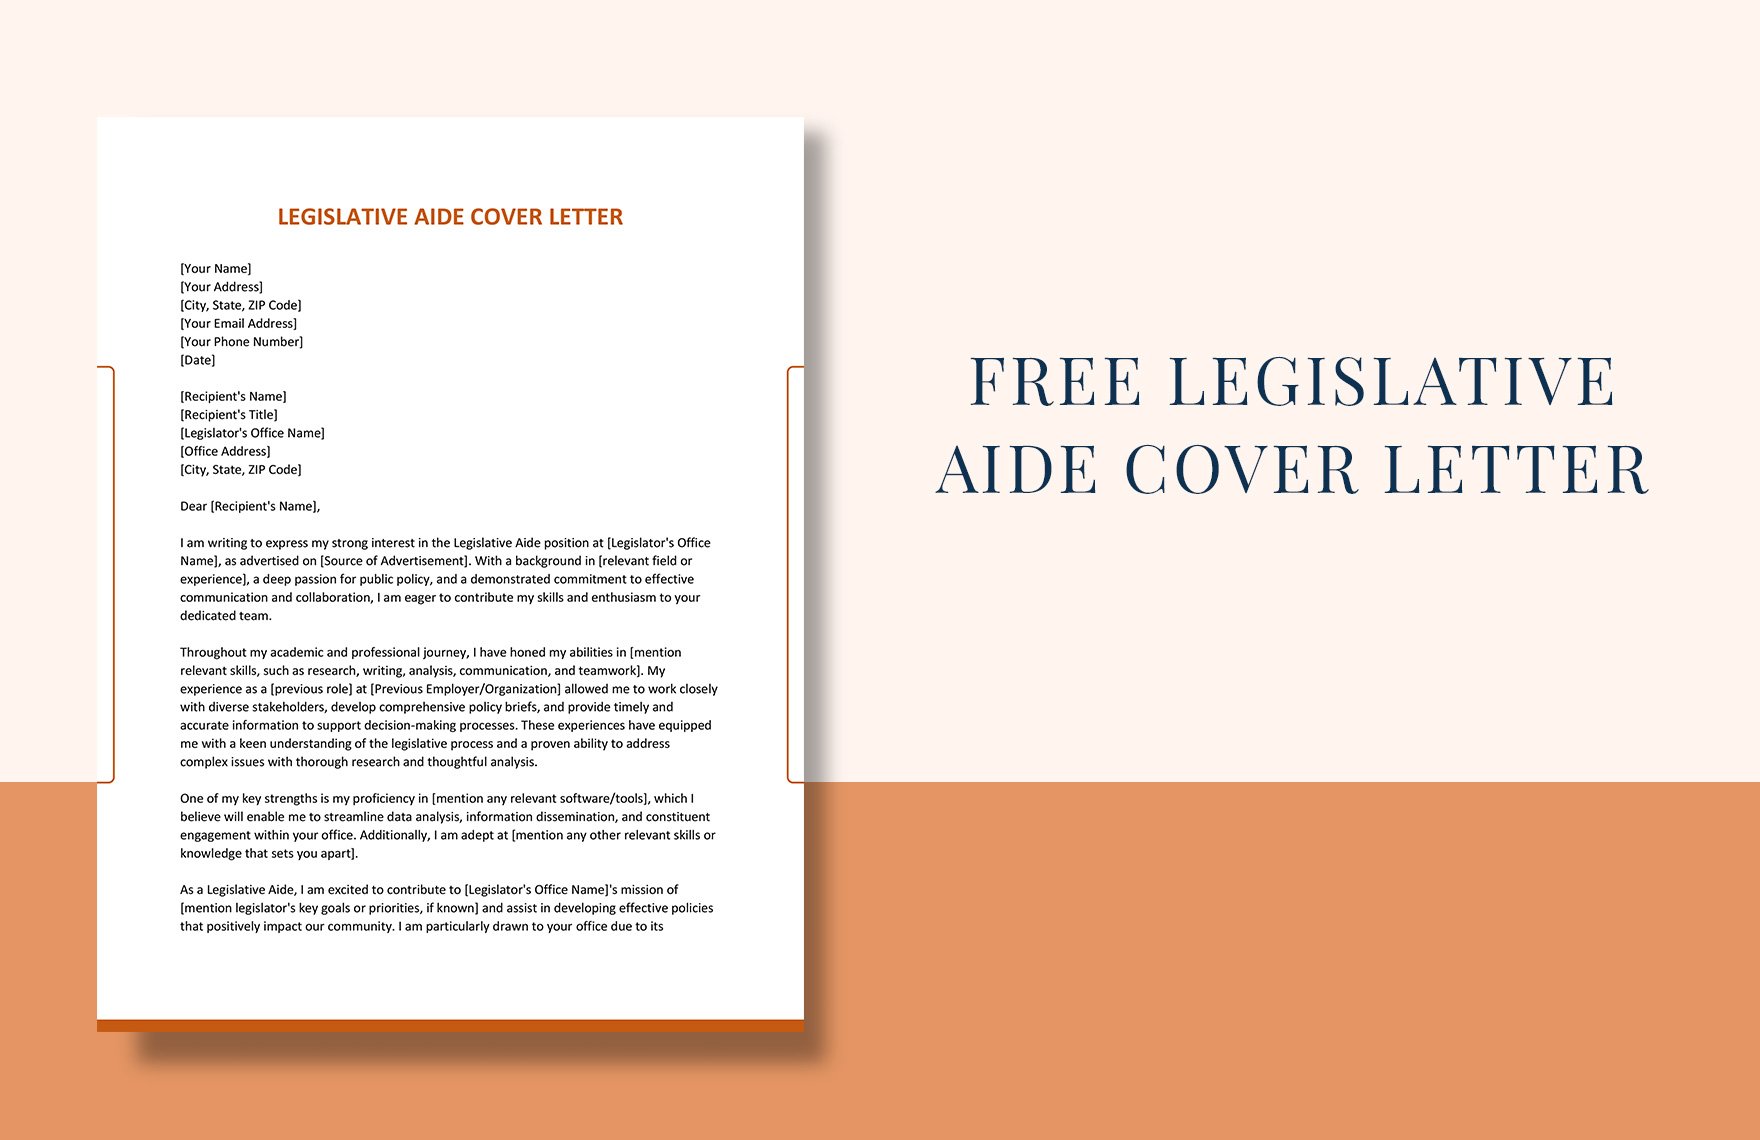 Legislative Aide Cover Letter in Word, Google Docs, Apple Pages